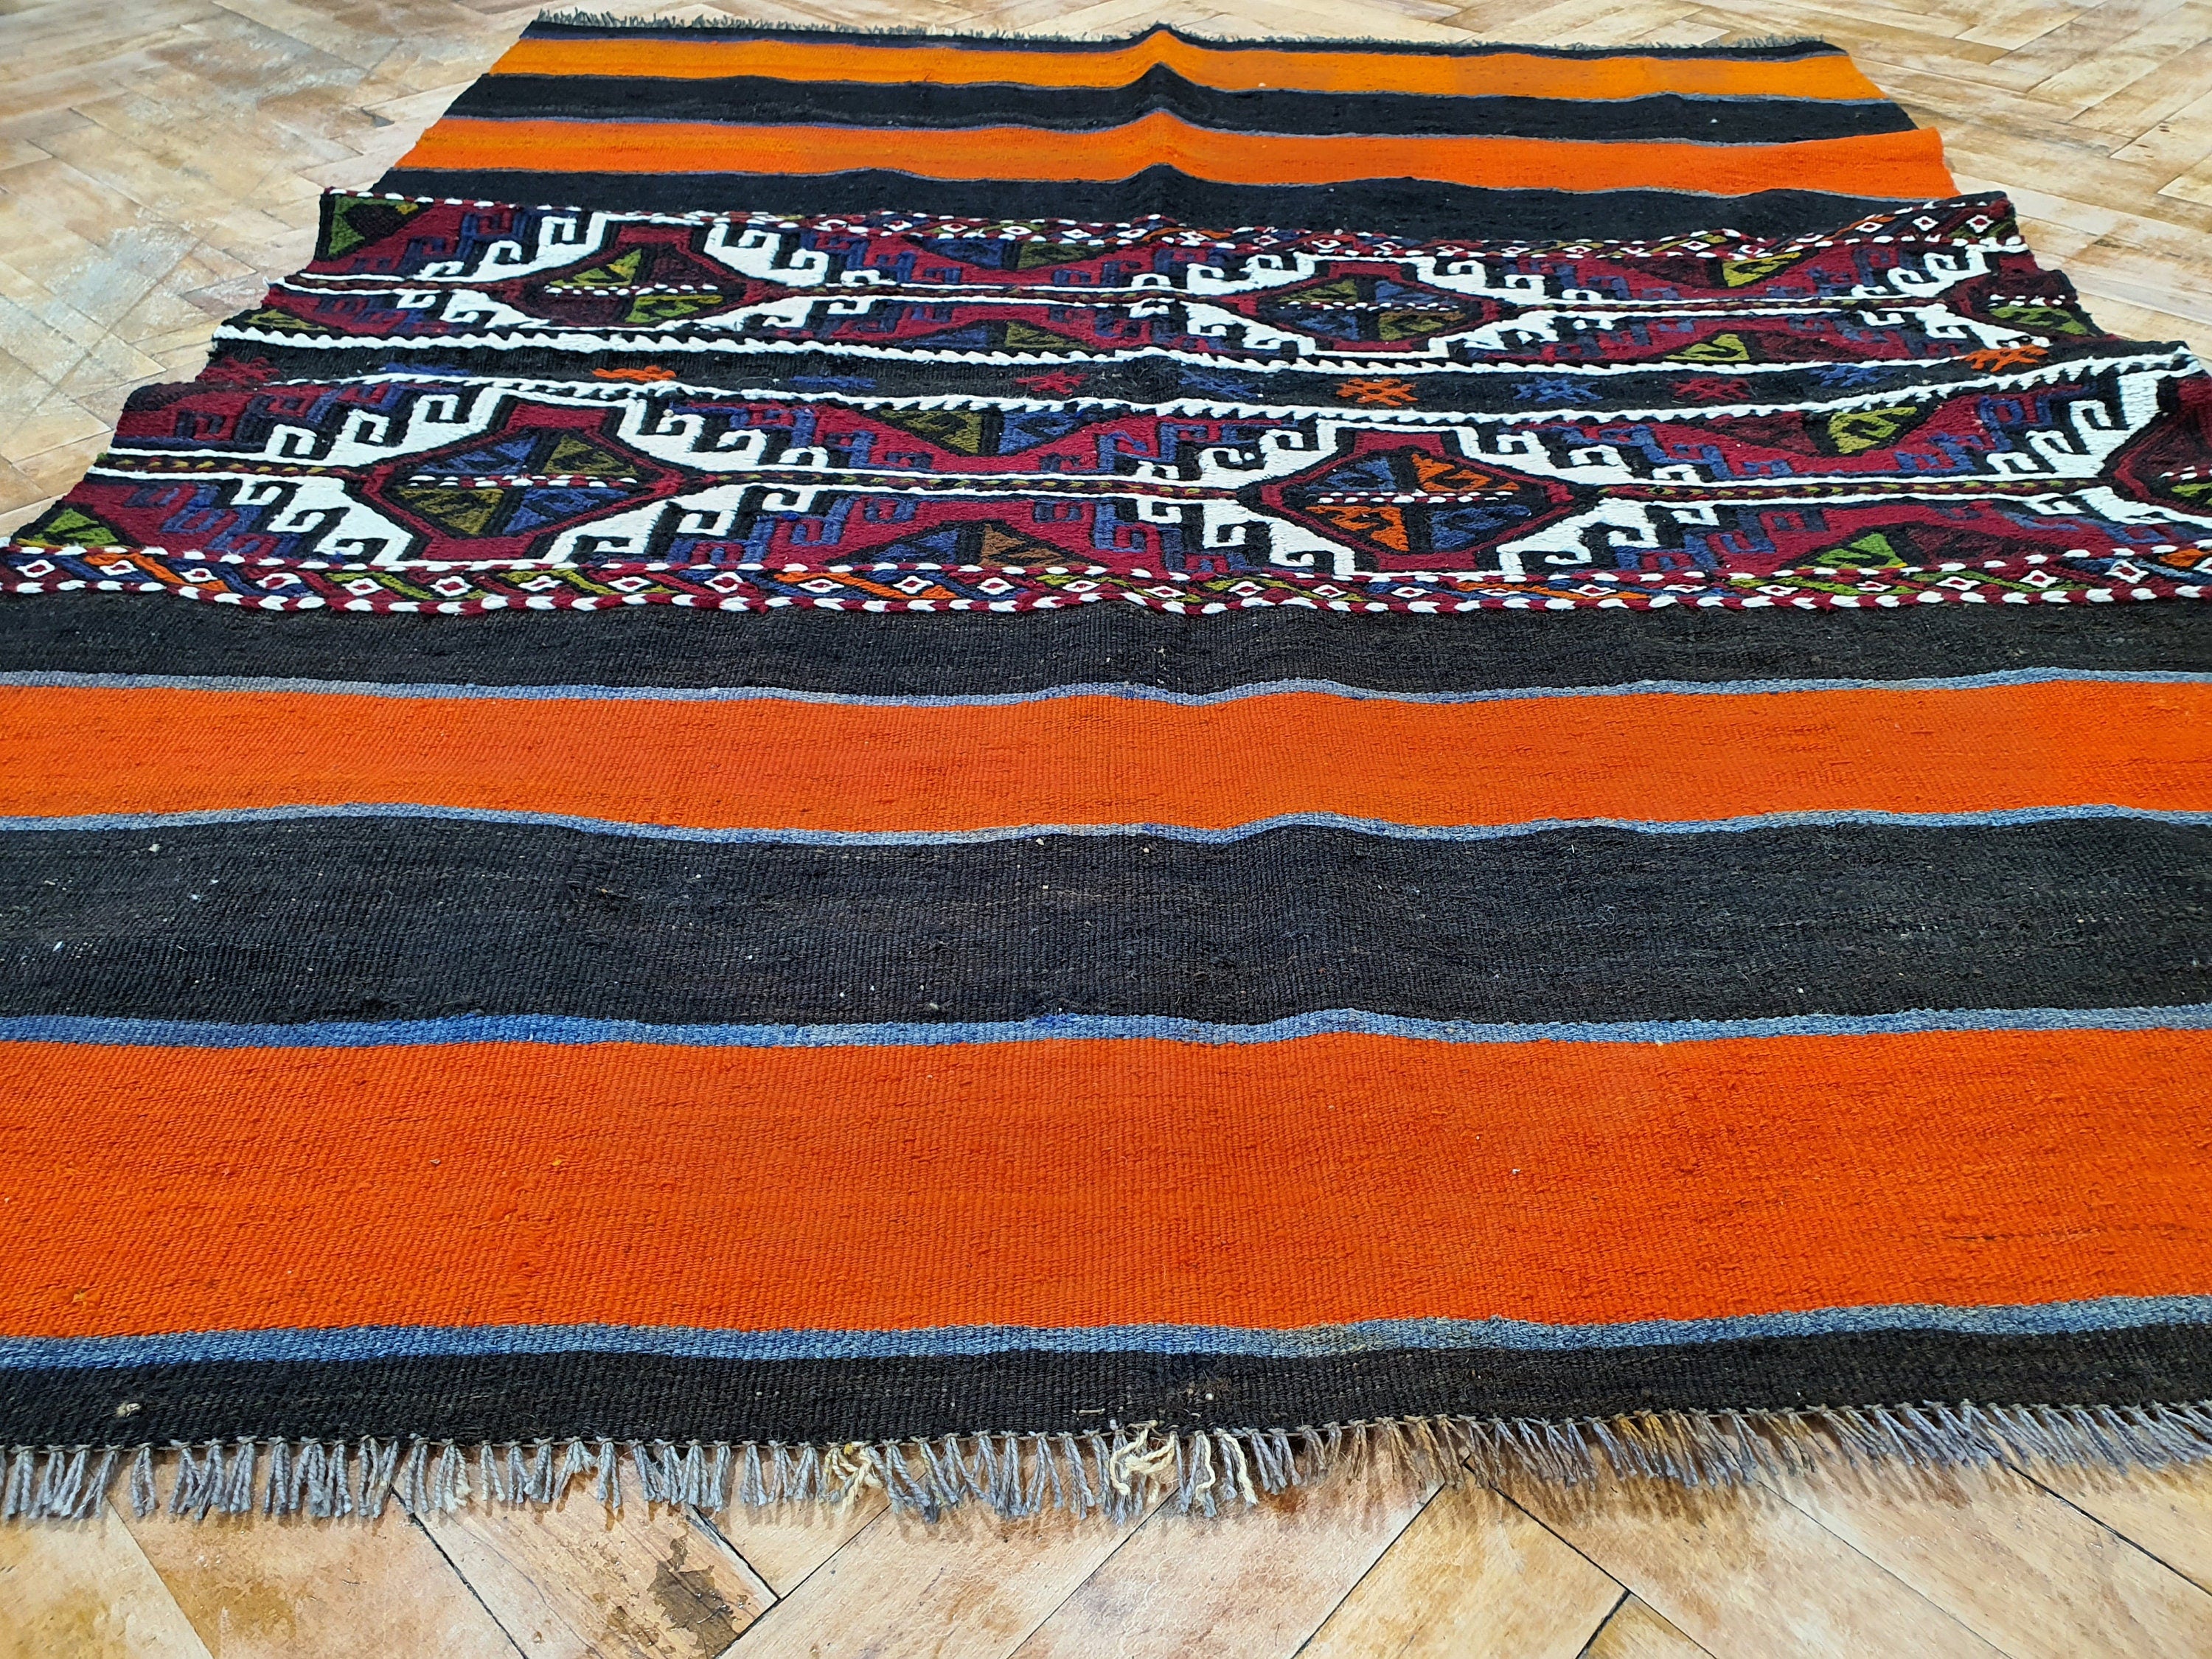 Turkish Kilim Rug, 4 ft 3 in x 3 ft 6 in,Terracotta and Brown Vintage Cicim Embroidered Kilim Rug